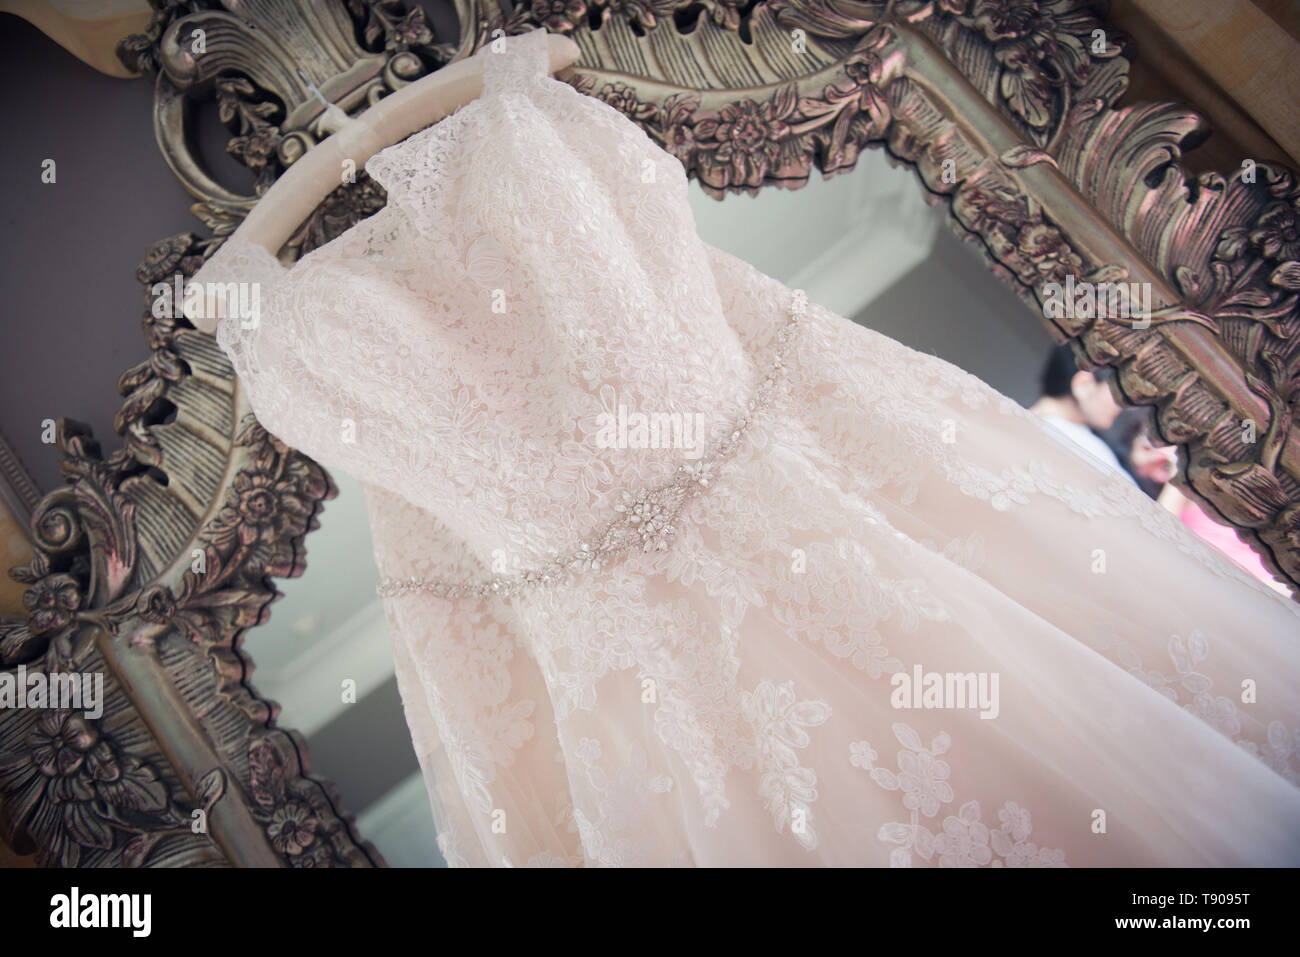 Plus size wedding dress hanging from mirror Stock Photo